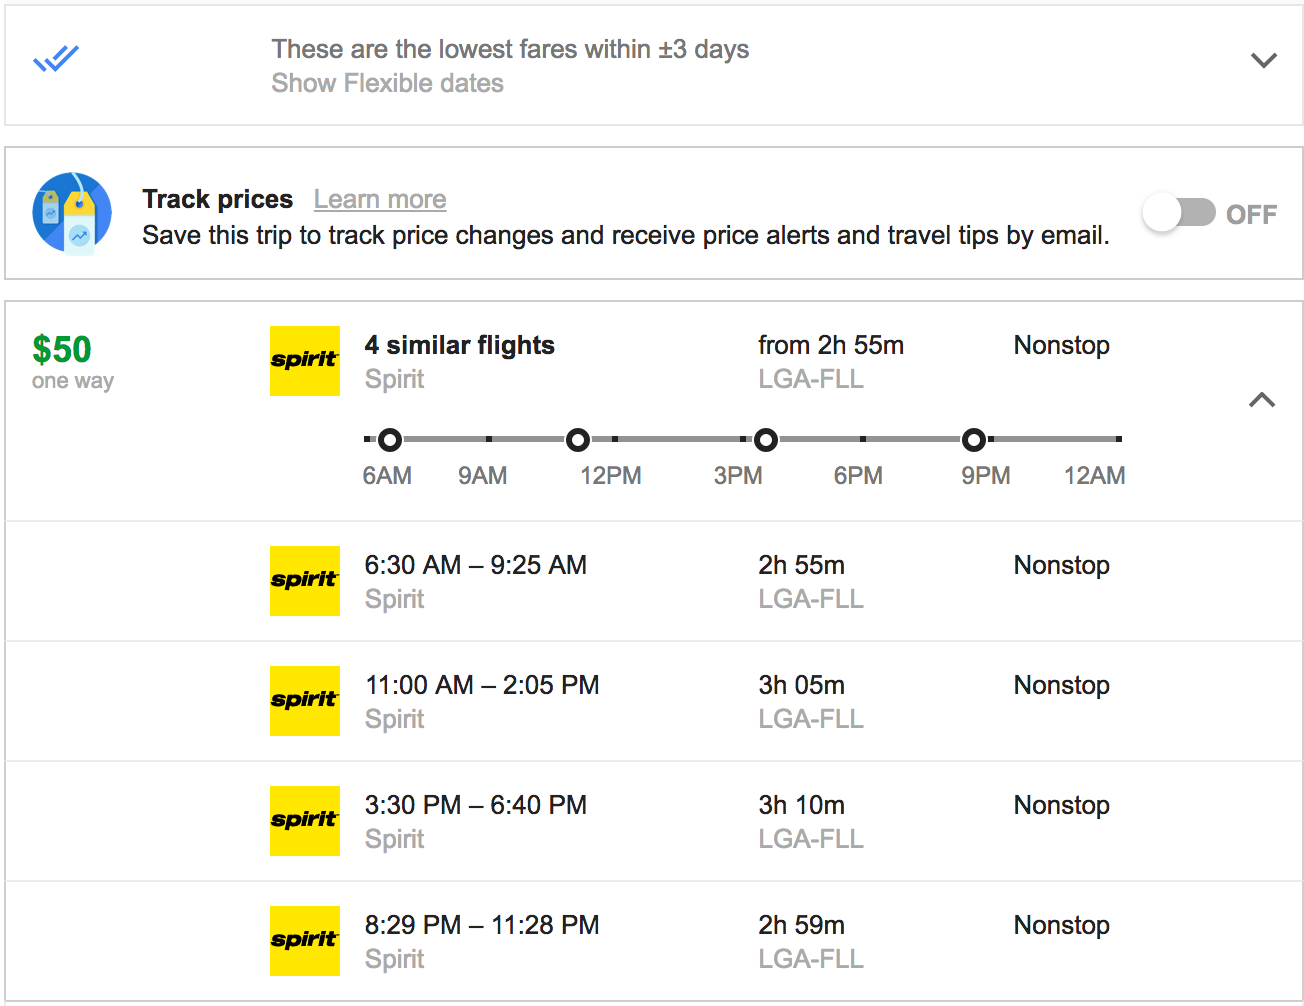 Spirit Airlines Charges $50 to fly from New York to South Florida (Image: Google Flights)